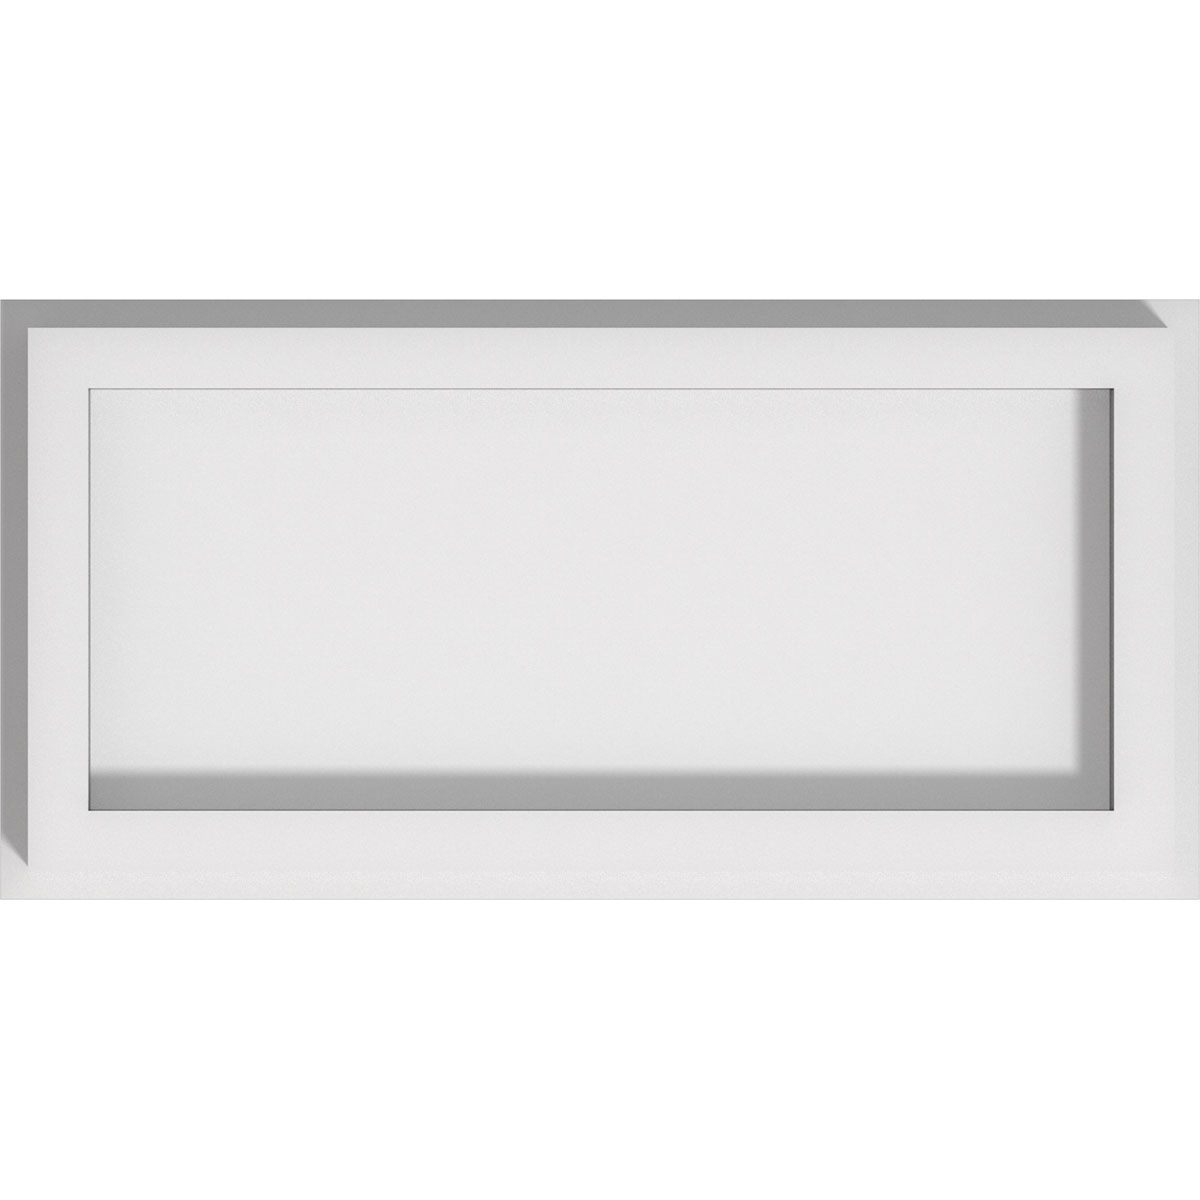 Cmp10x5re 5 X 10 In. Rectangle Architectural Grade Pvc Contemporary Ceiling Medallion